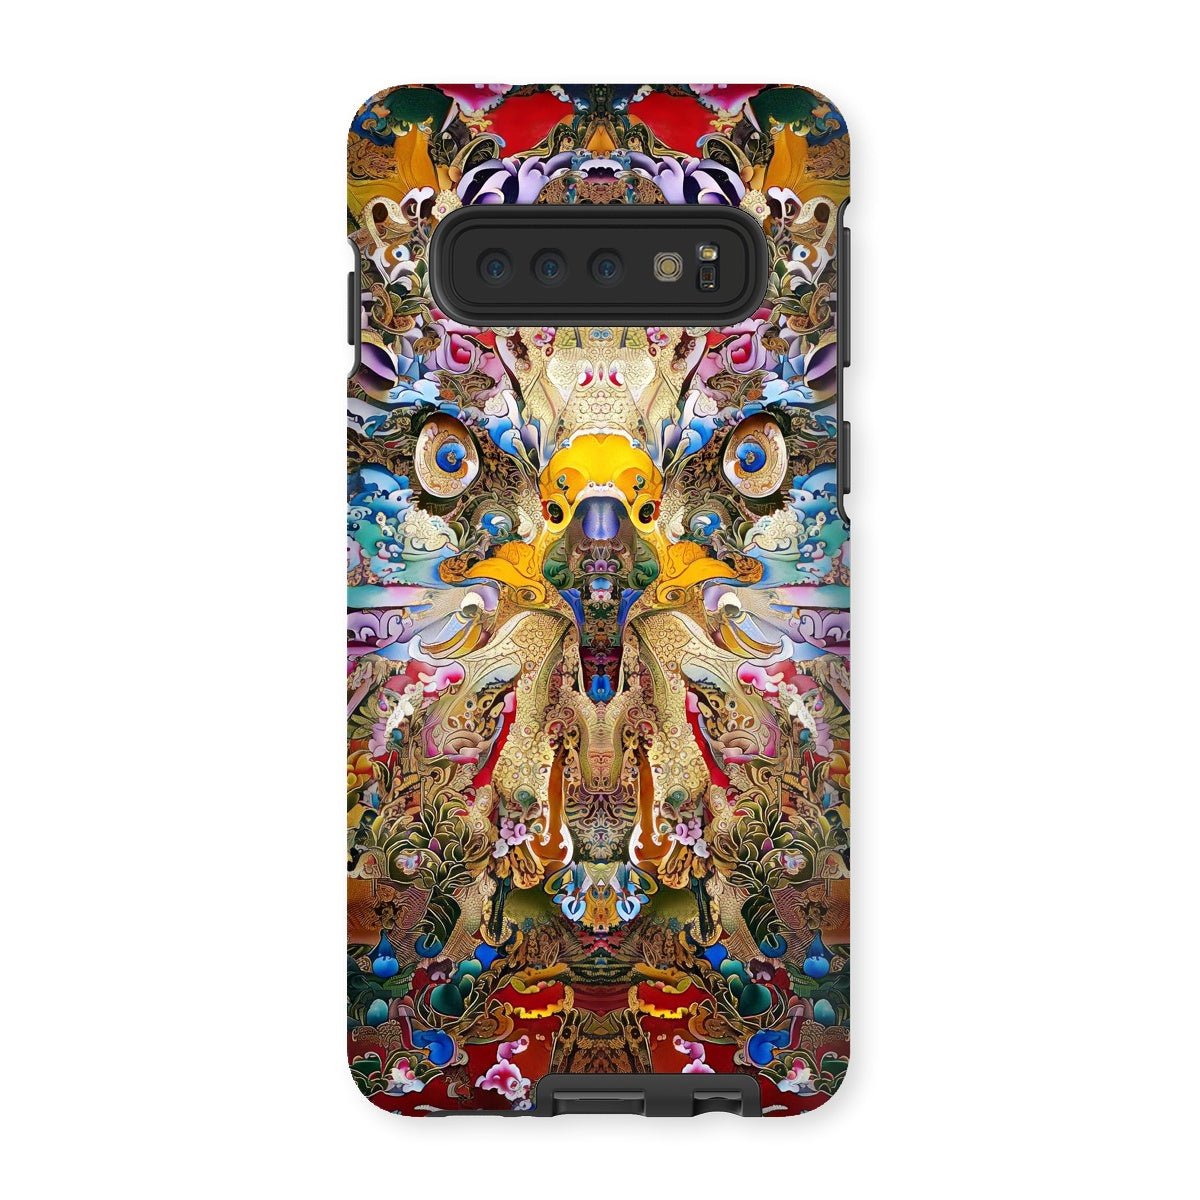 'Return of The Bird Tribes – Red Kite' Tough Phone Case